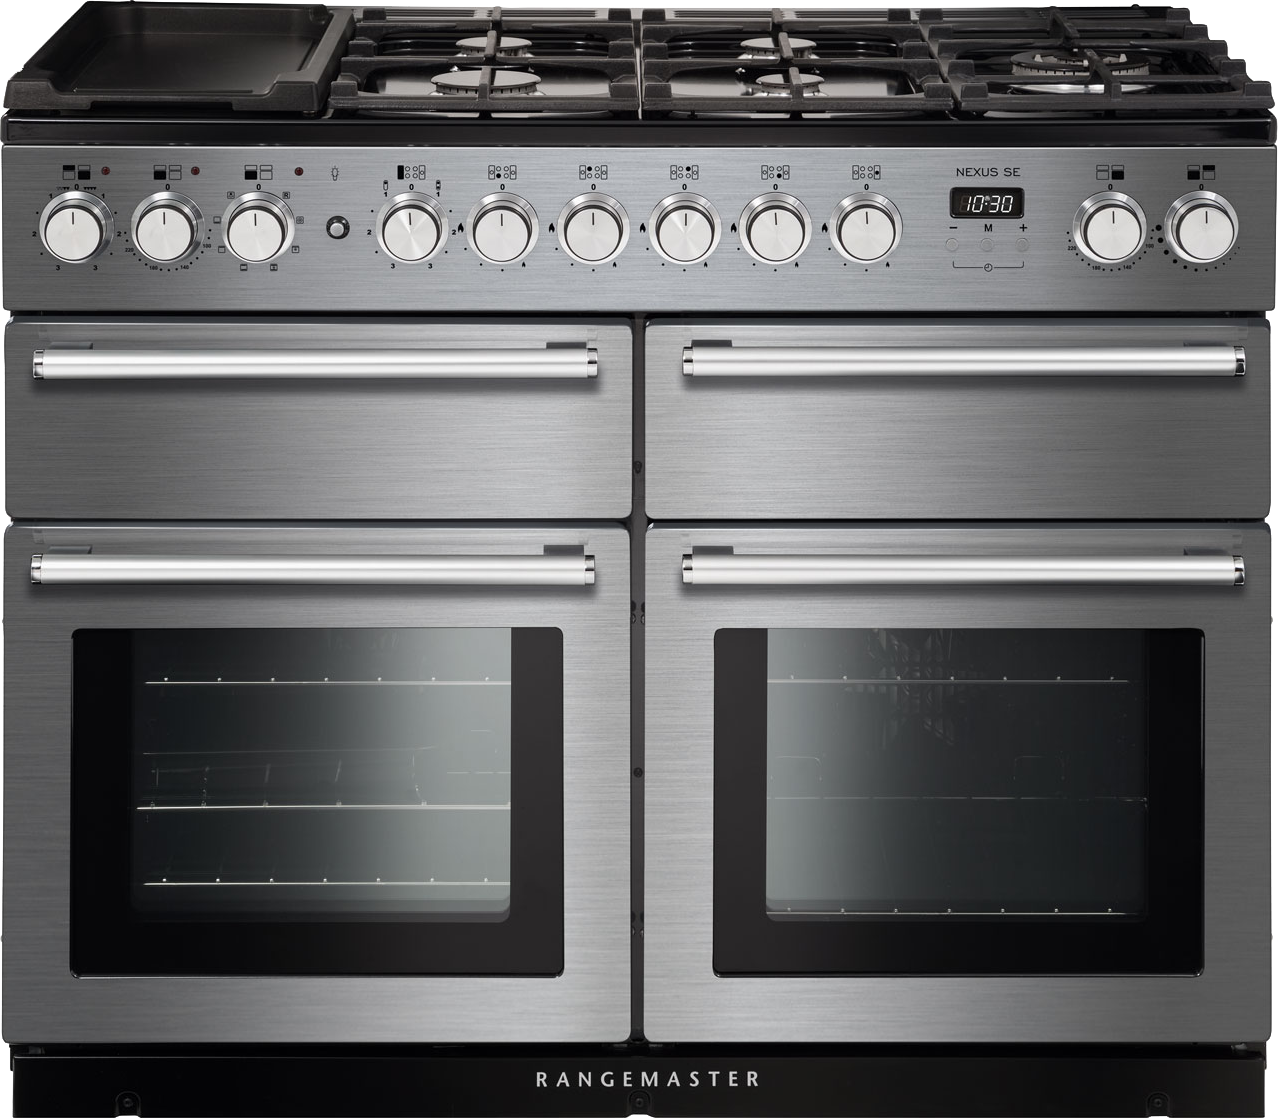 Rangemaster Nexus SE NEXSE110DFFSS/C 110cm Dual Fuel Range Cooker - Stainless Steel / Chrome - A/A Rated, Stainless Steel